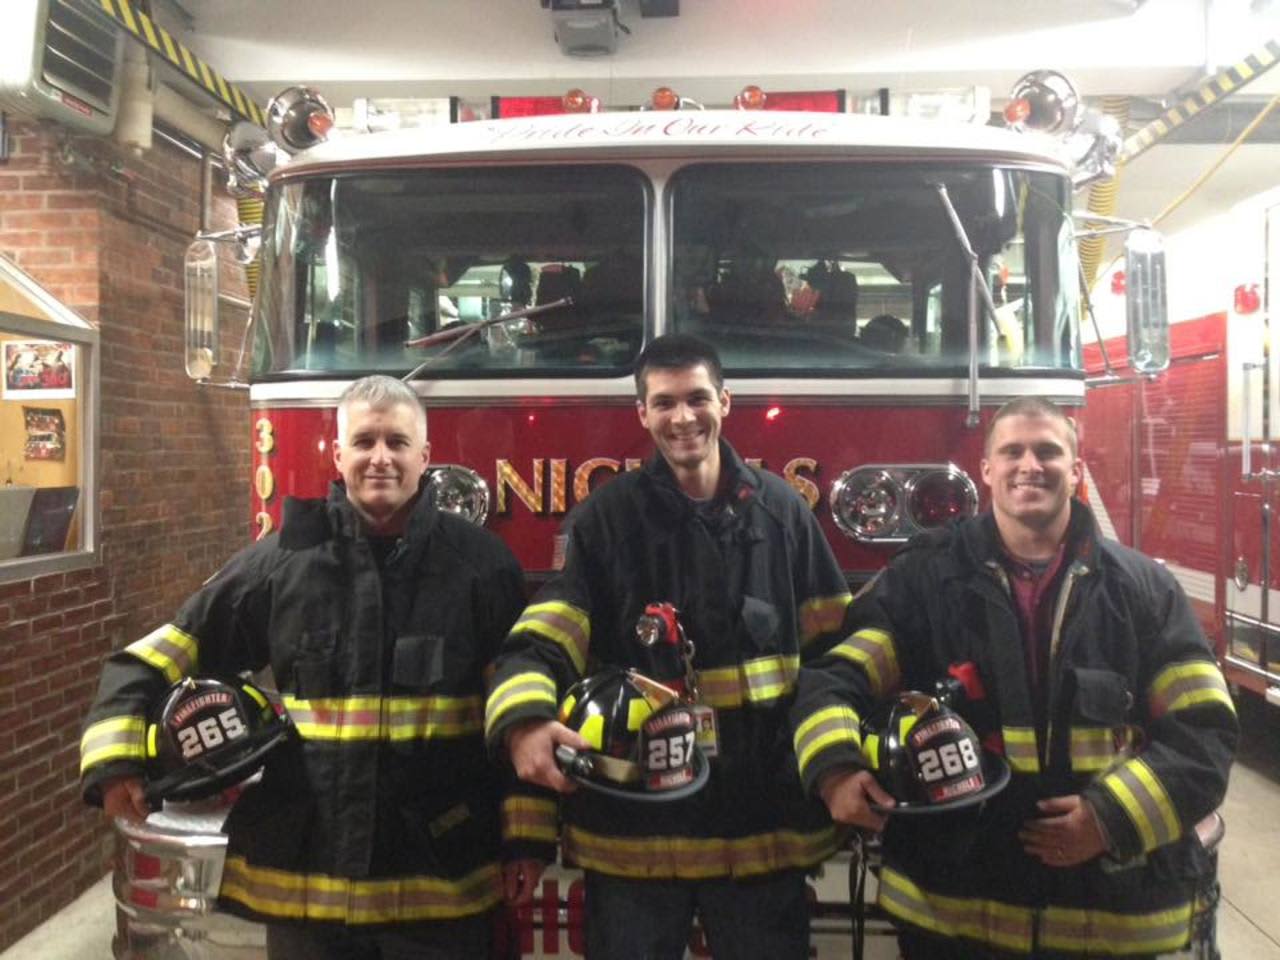 Nichols Firefighters Matthew Taormina, Andrew Banas and Brendan Murray have completed the State of Connecticut Firefighter One Class.